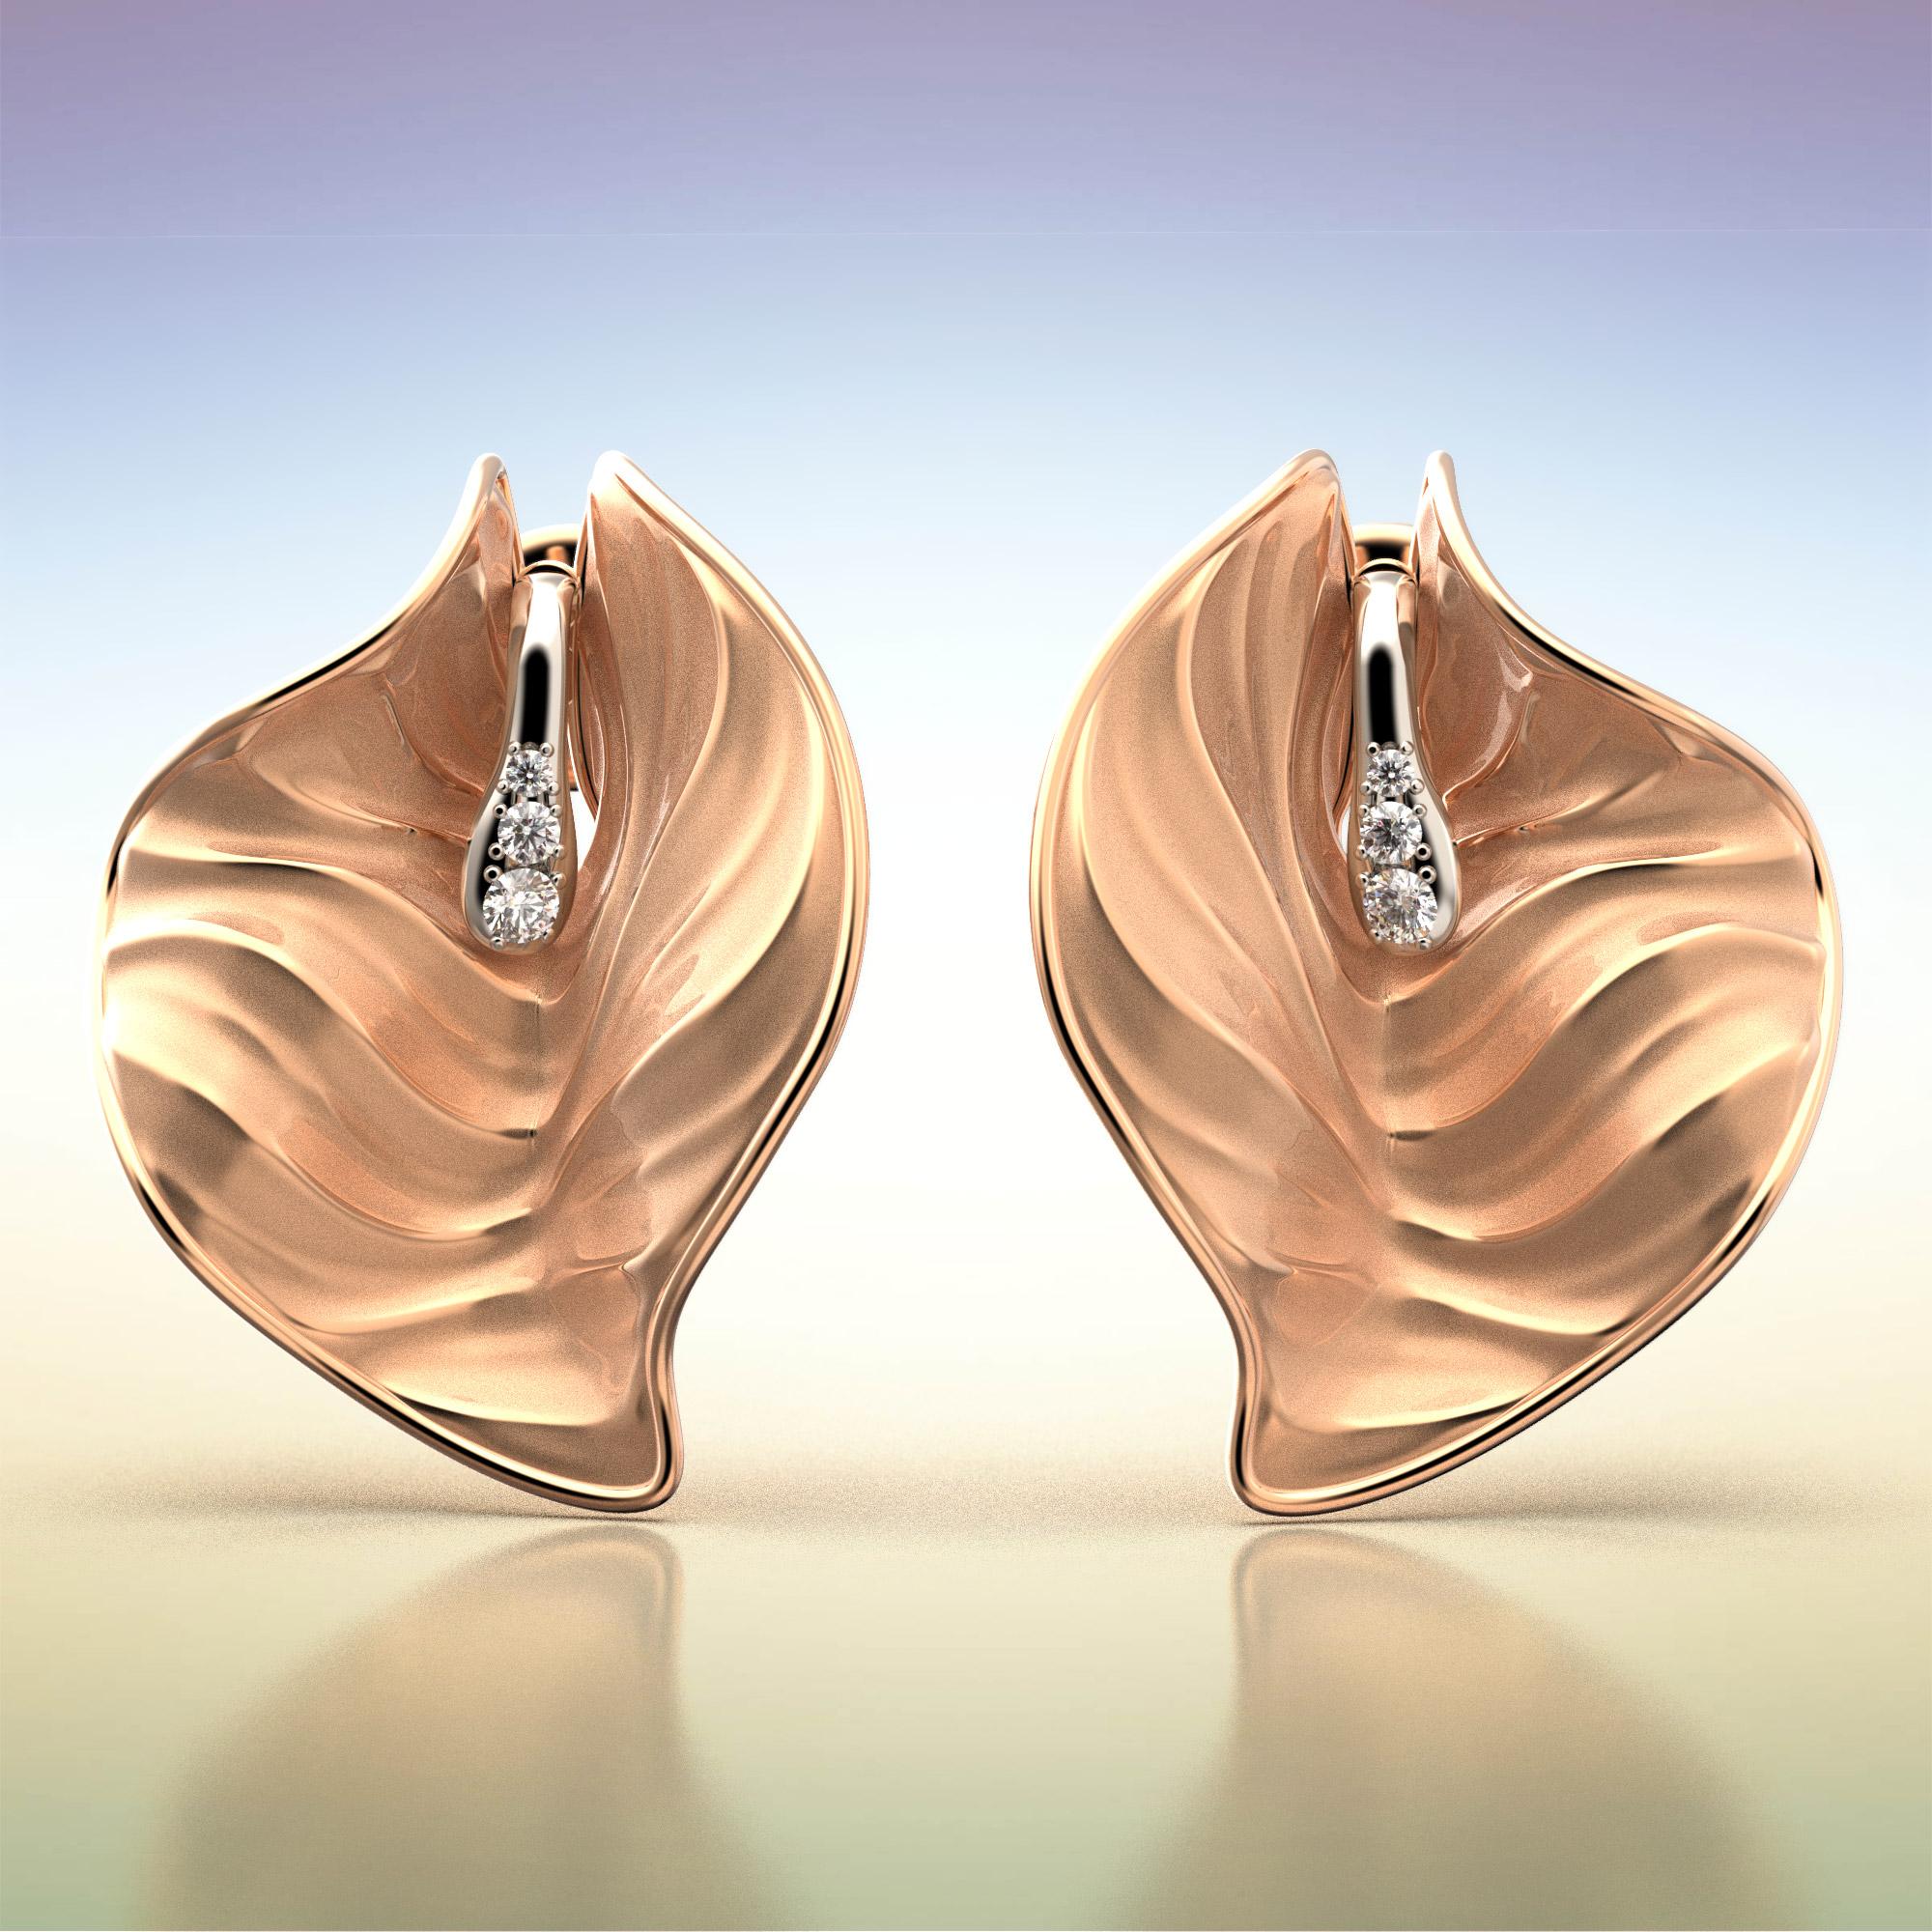 Calla earrings have an interplay of sinuous movements, embellished by the diamonds set on the pistil.
A sophisticated and unique piece of jewelry.  
Vento is a collection created to enhance feminine beauty with soft surface movements that dance like